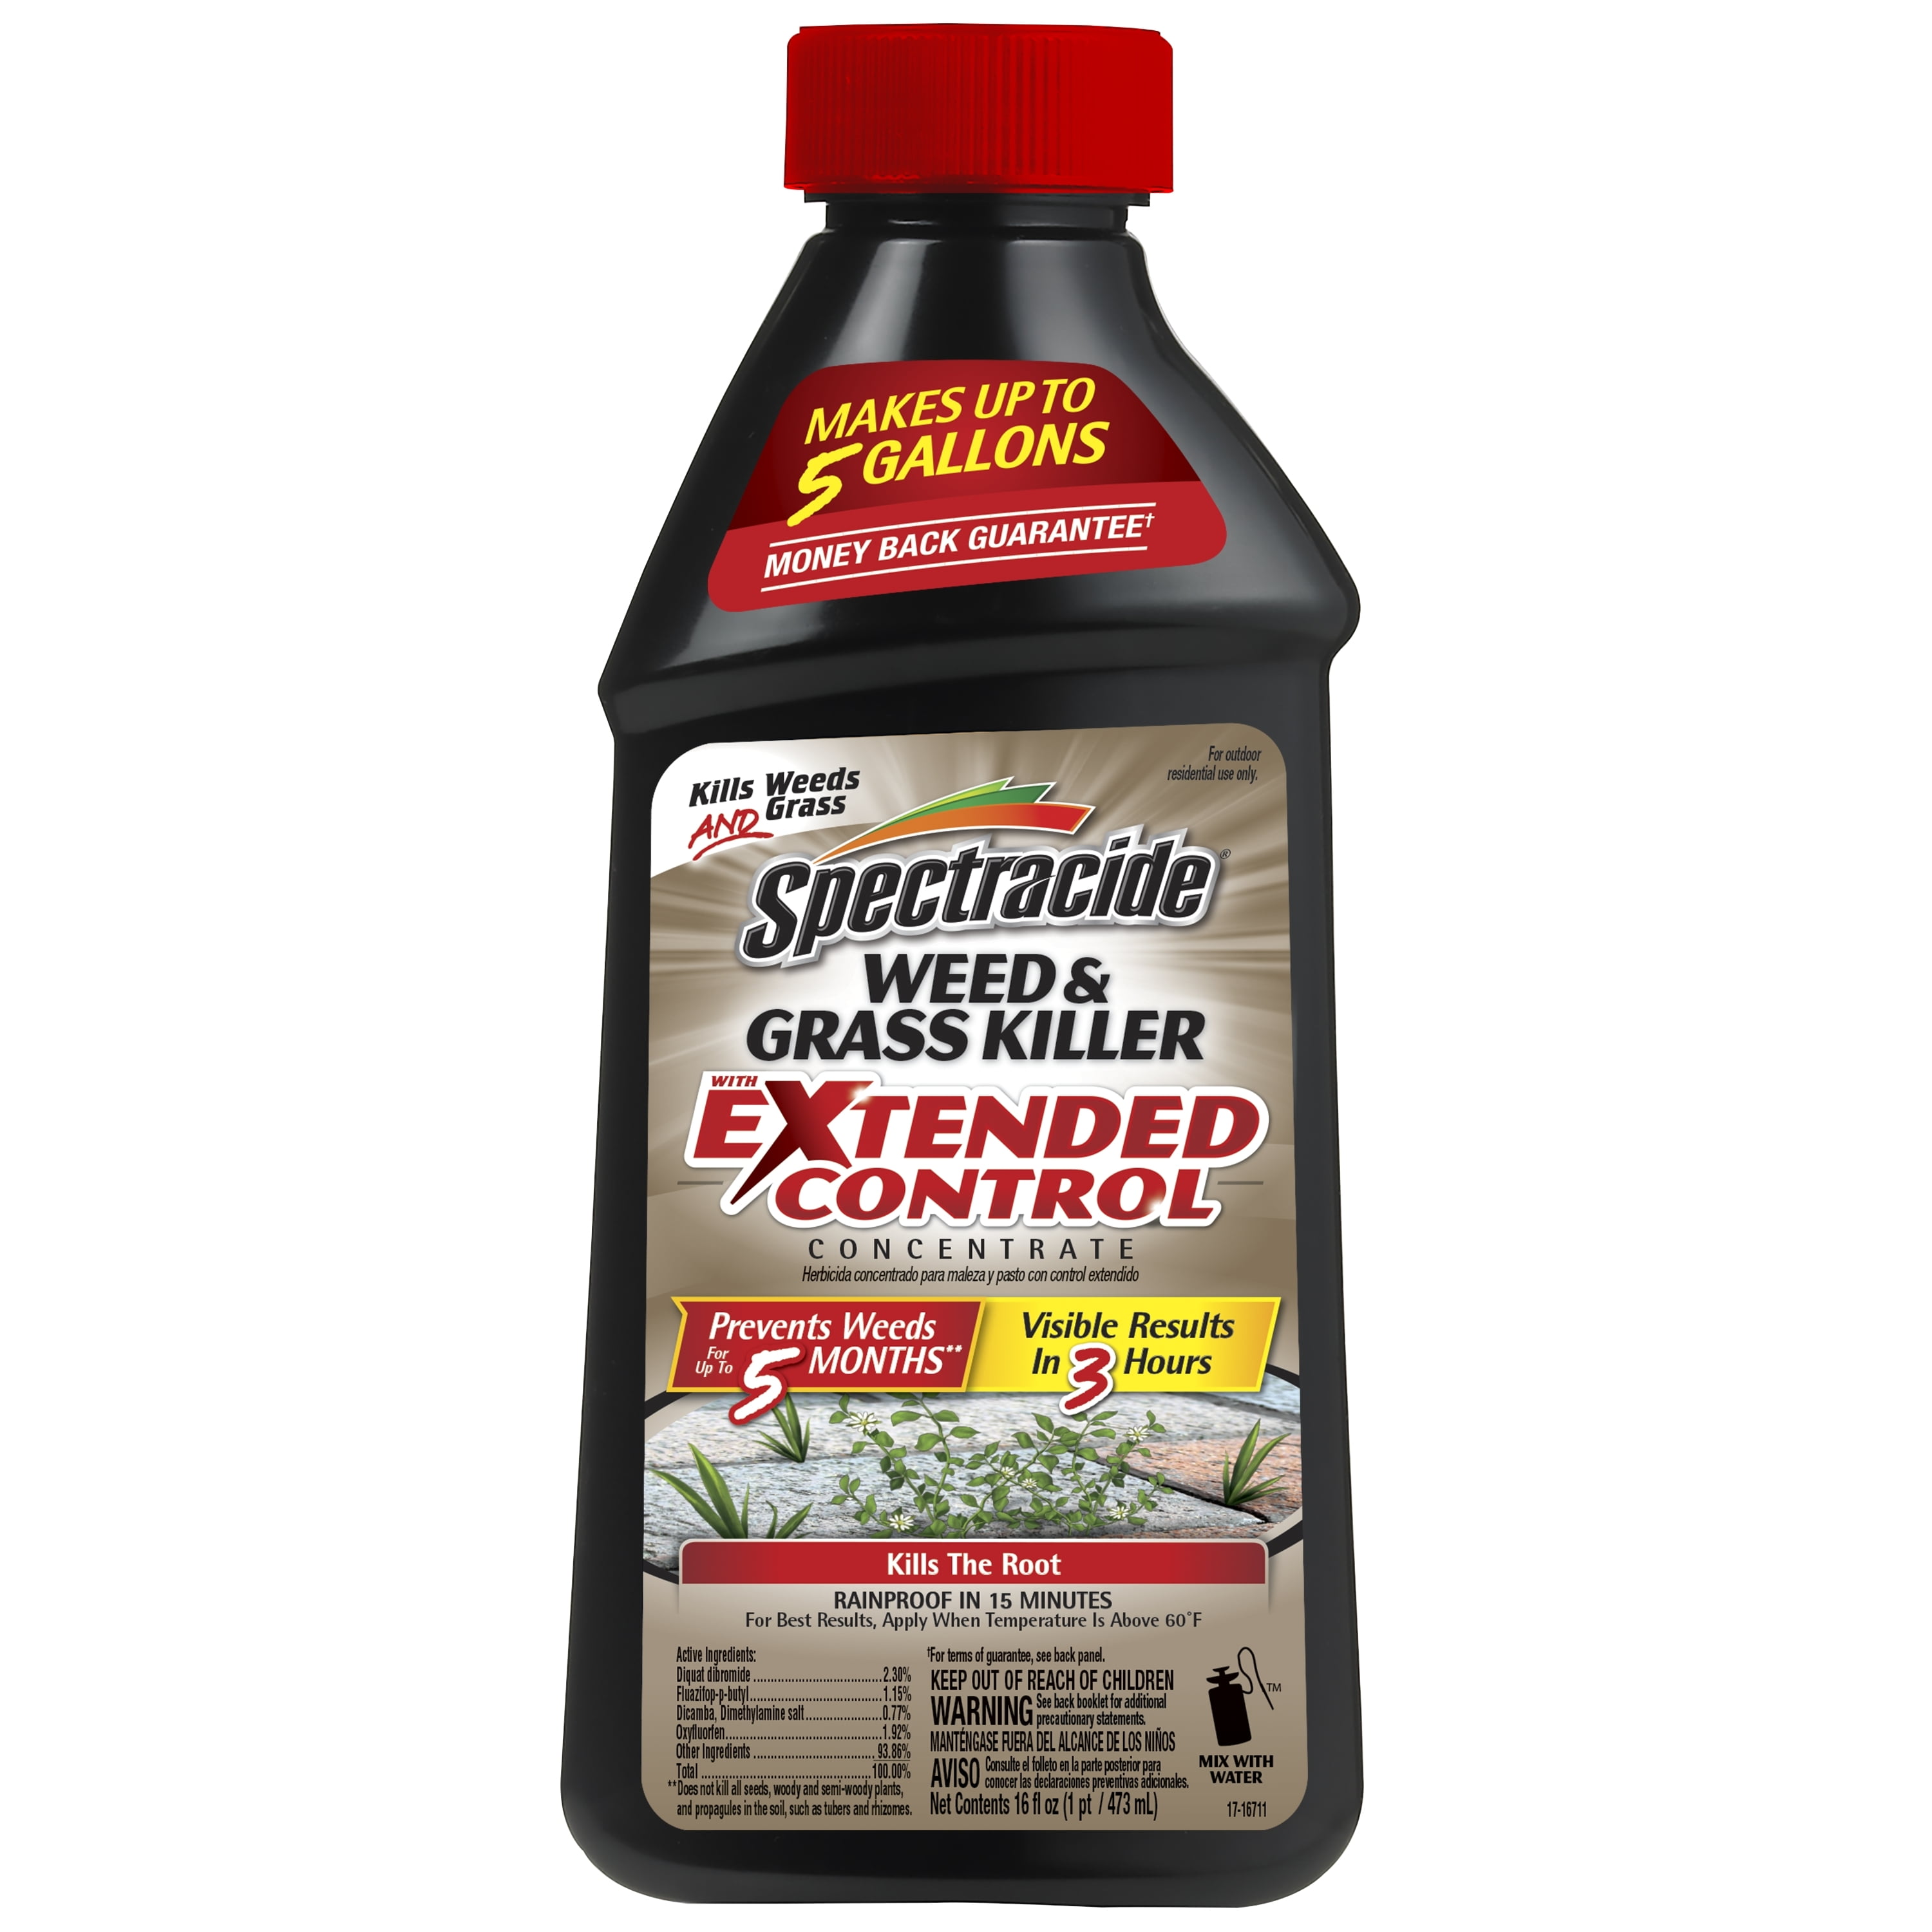 Spectracide Weed & Grass Killer with Extended Control Concentrate